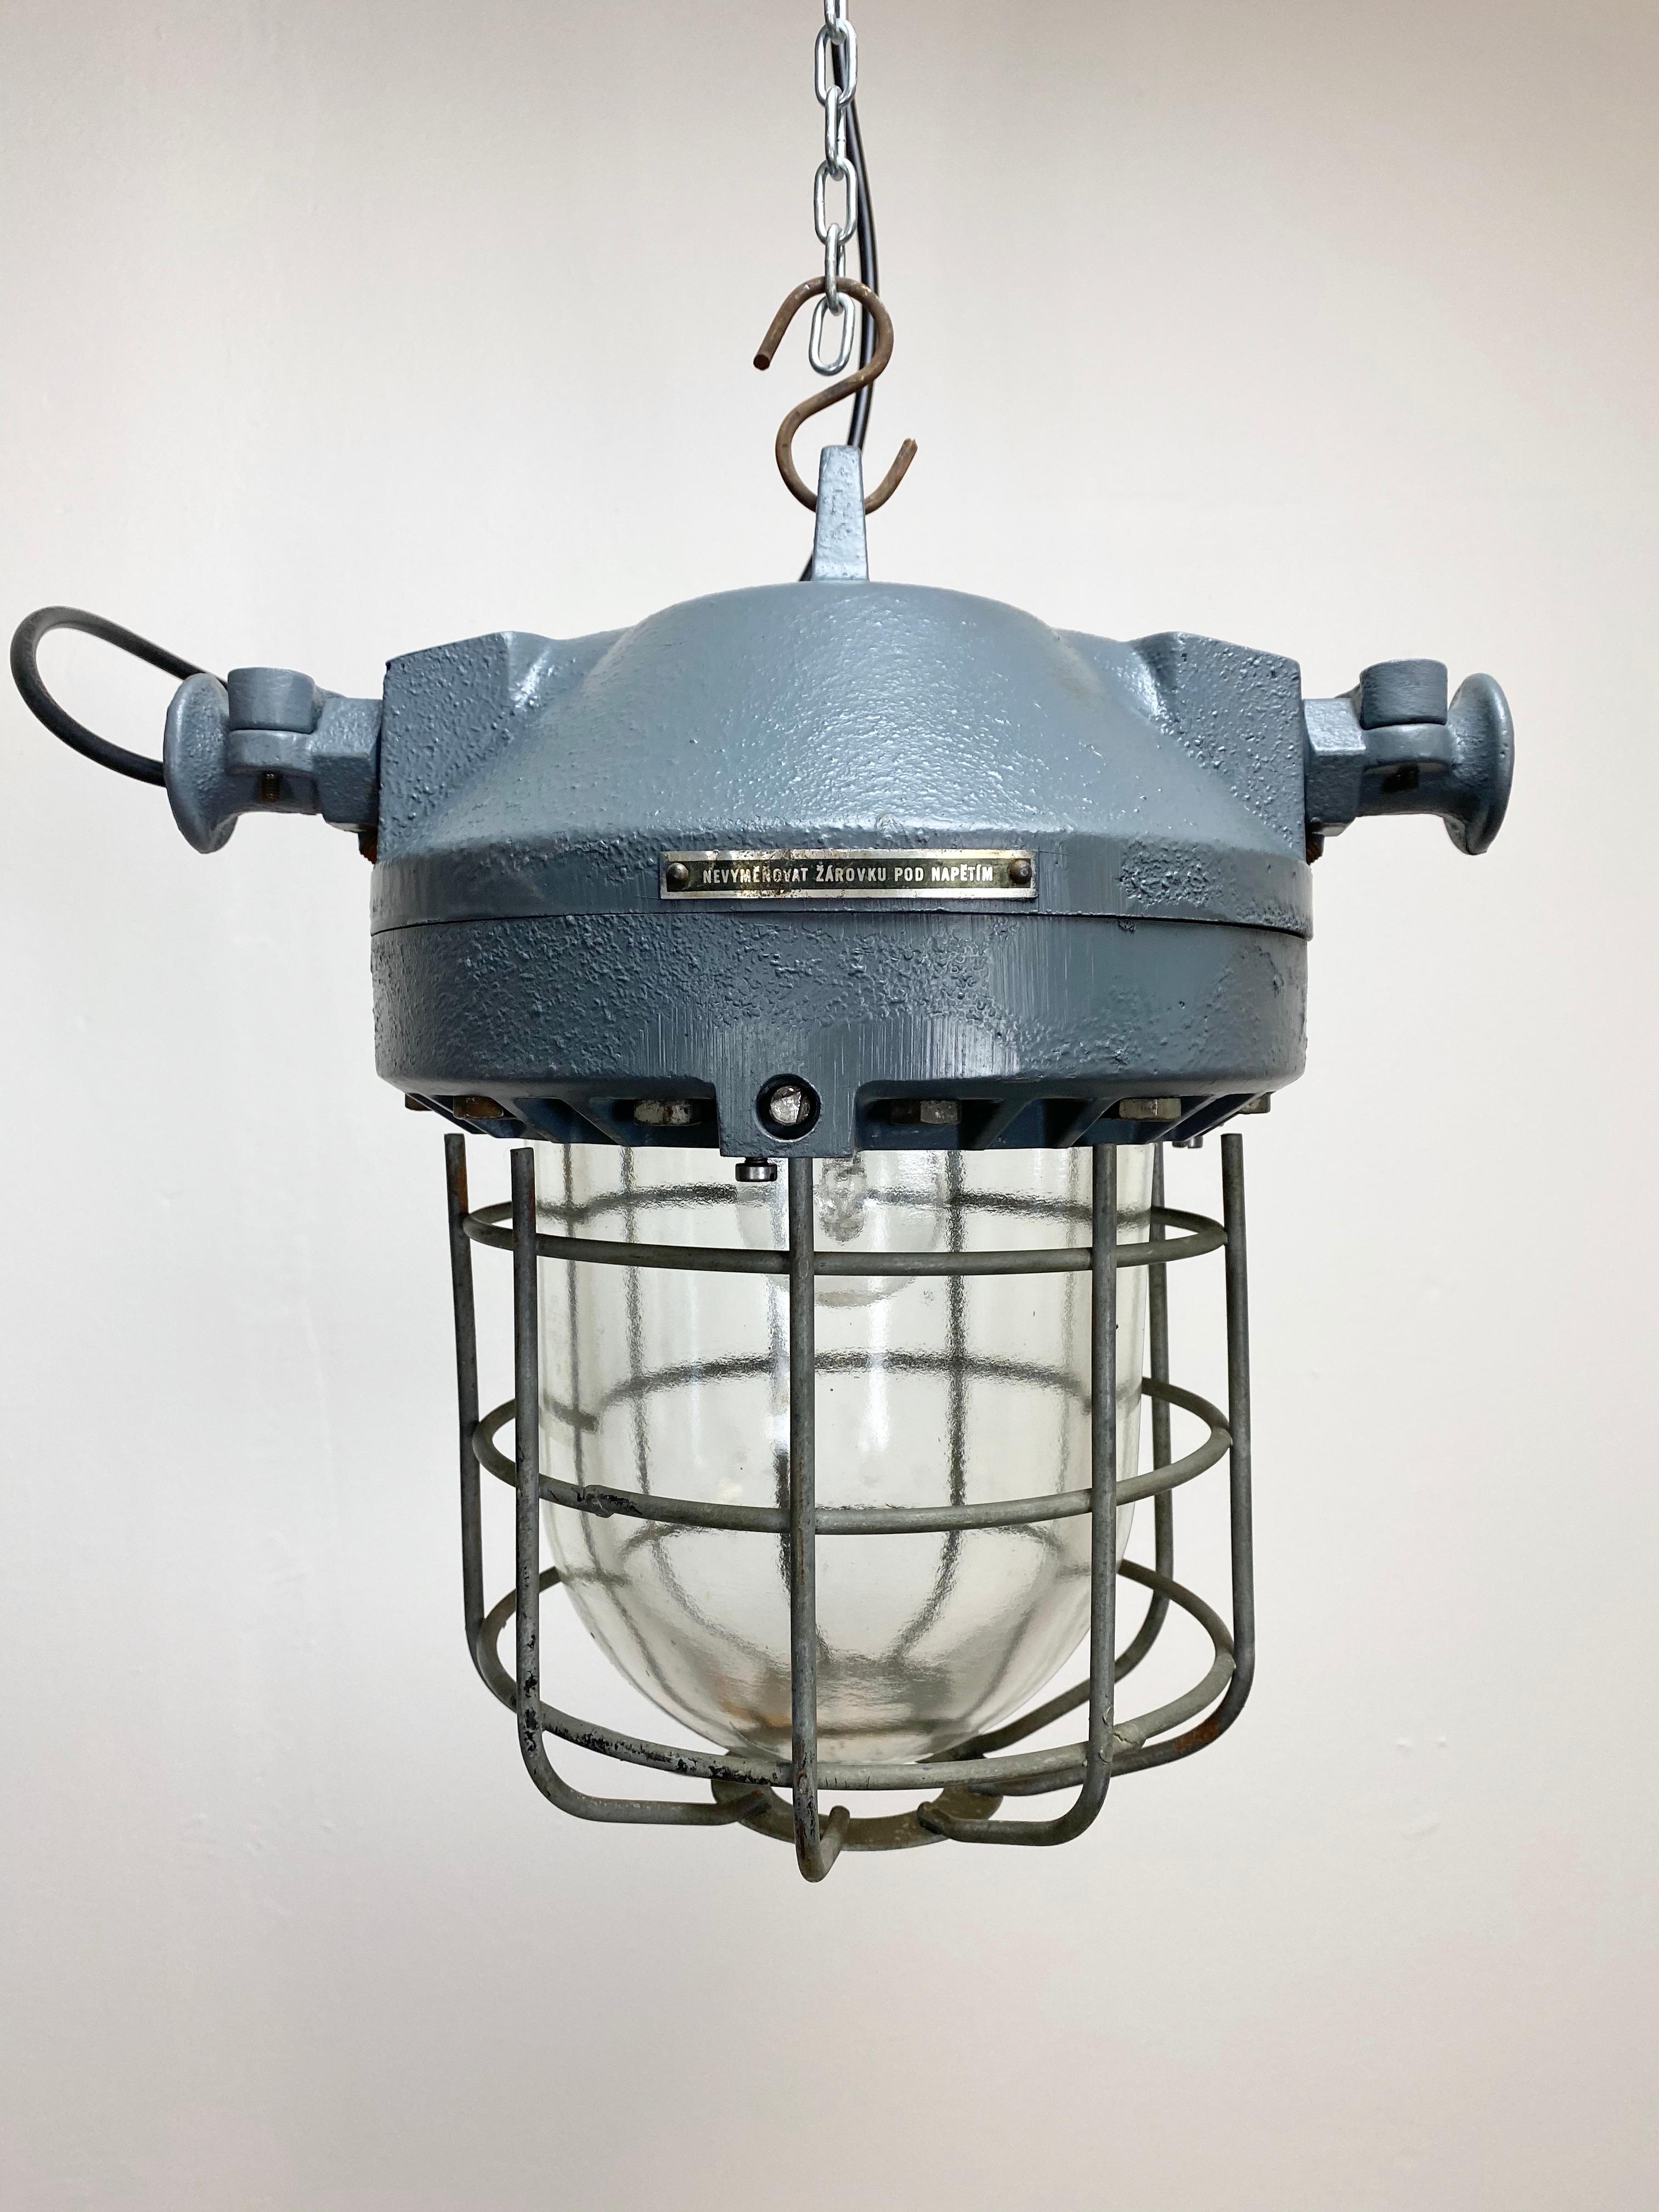 This industrial light was manufactured in former Czechoslovakia by Elektrosvit in the 1970s. It features a dark grey cast aluminum body, an iron cage and explosion-proof glass. It weighs 9.5 kg and has been rewired.
  